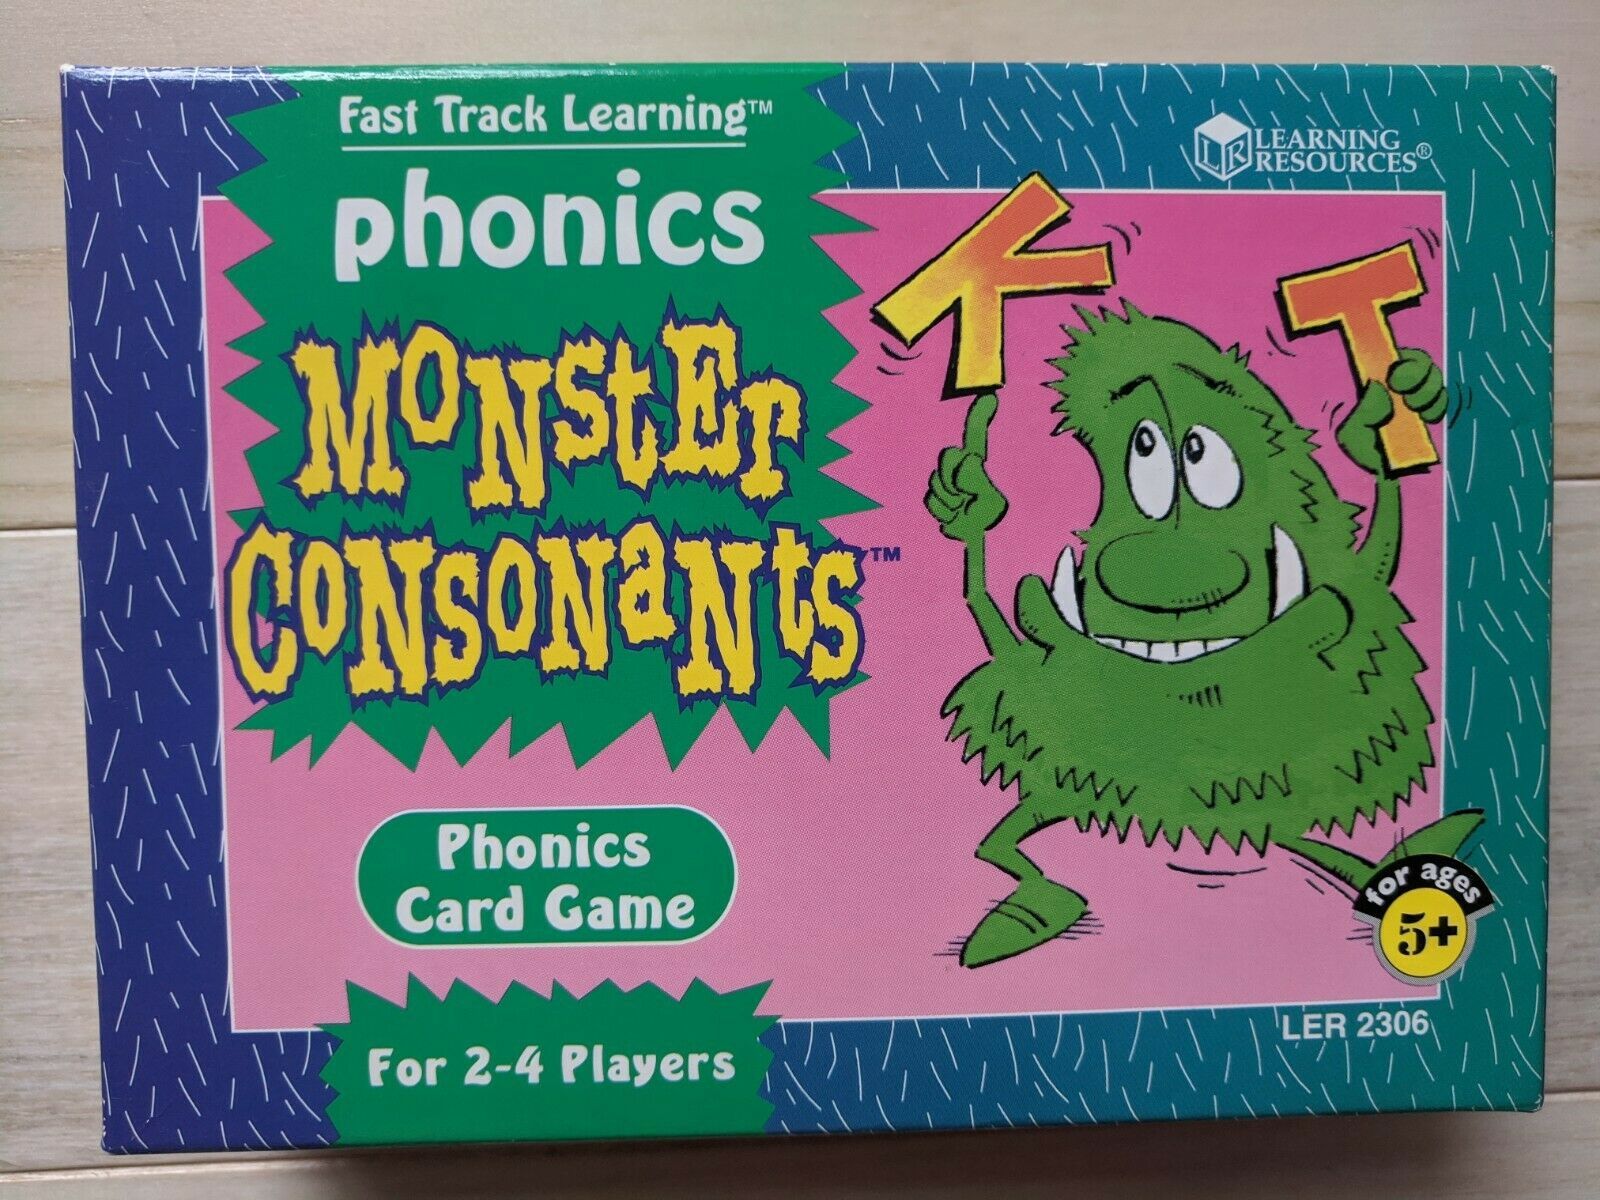 Fast Track Learning Phonics Card Game by Learning Reources - $15.00